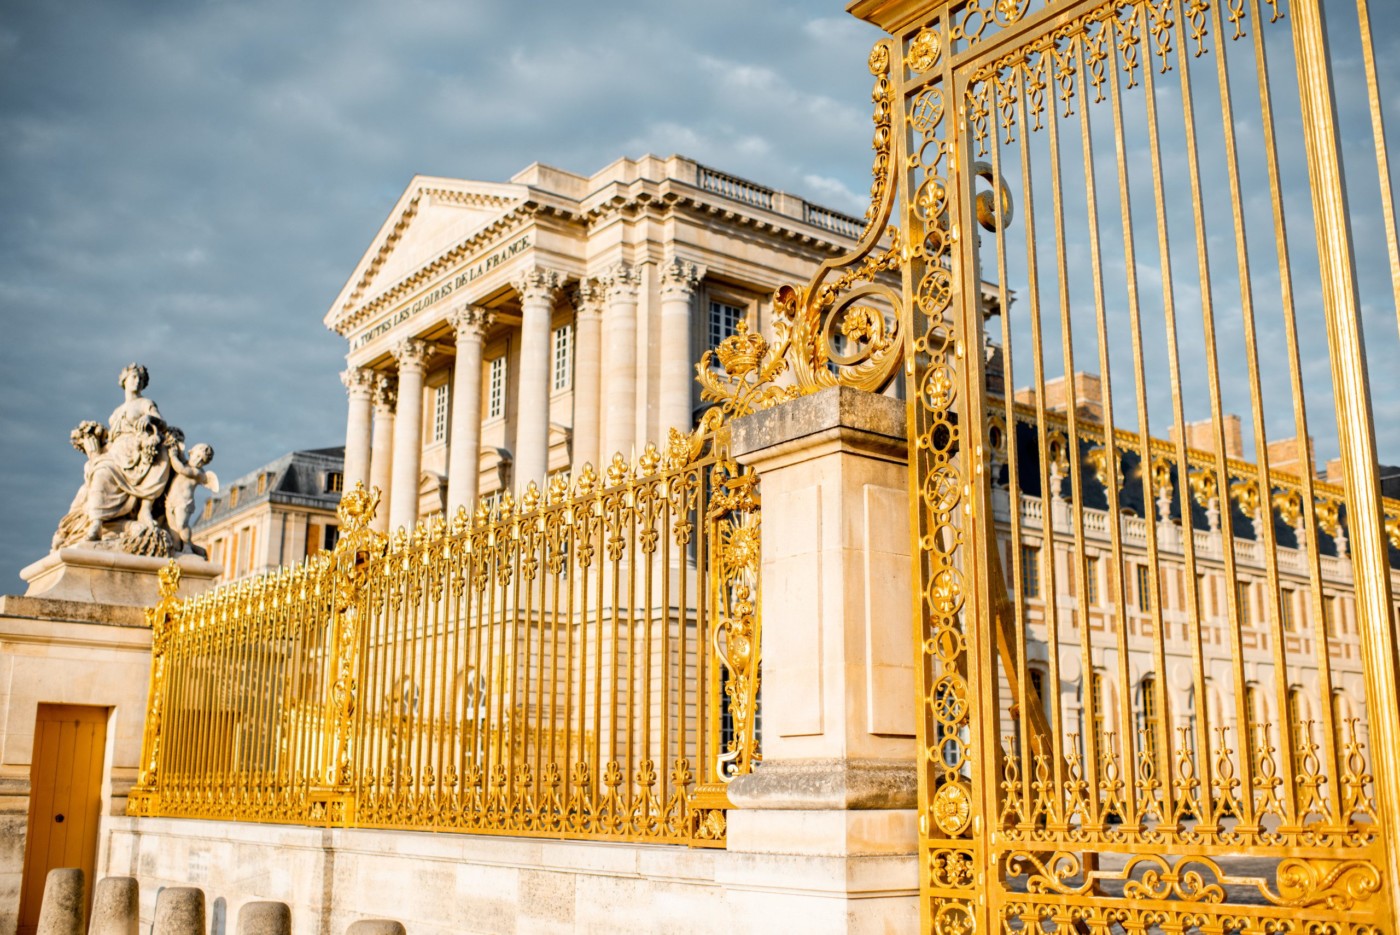 The golden gate of the palace of Versailles in France